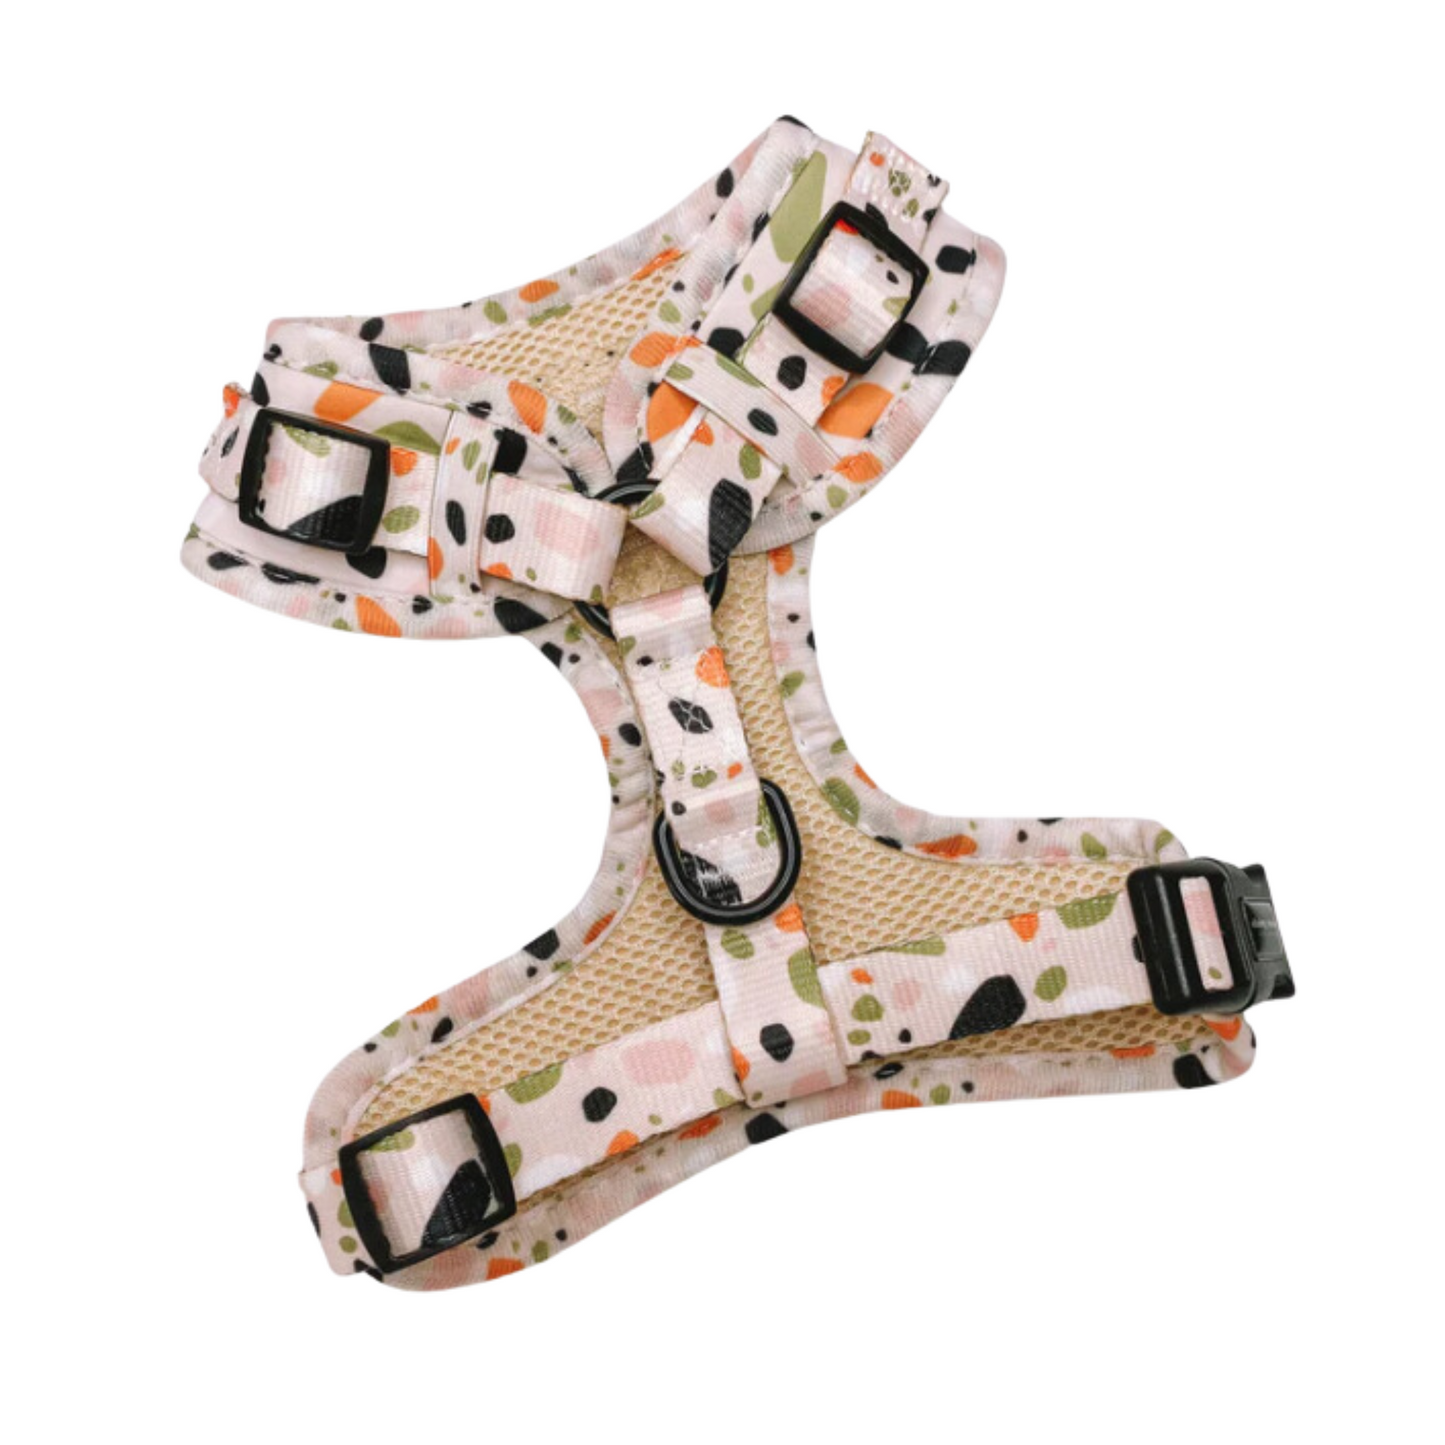 Daisy chains Harnesses - 4 Styles